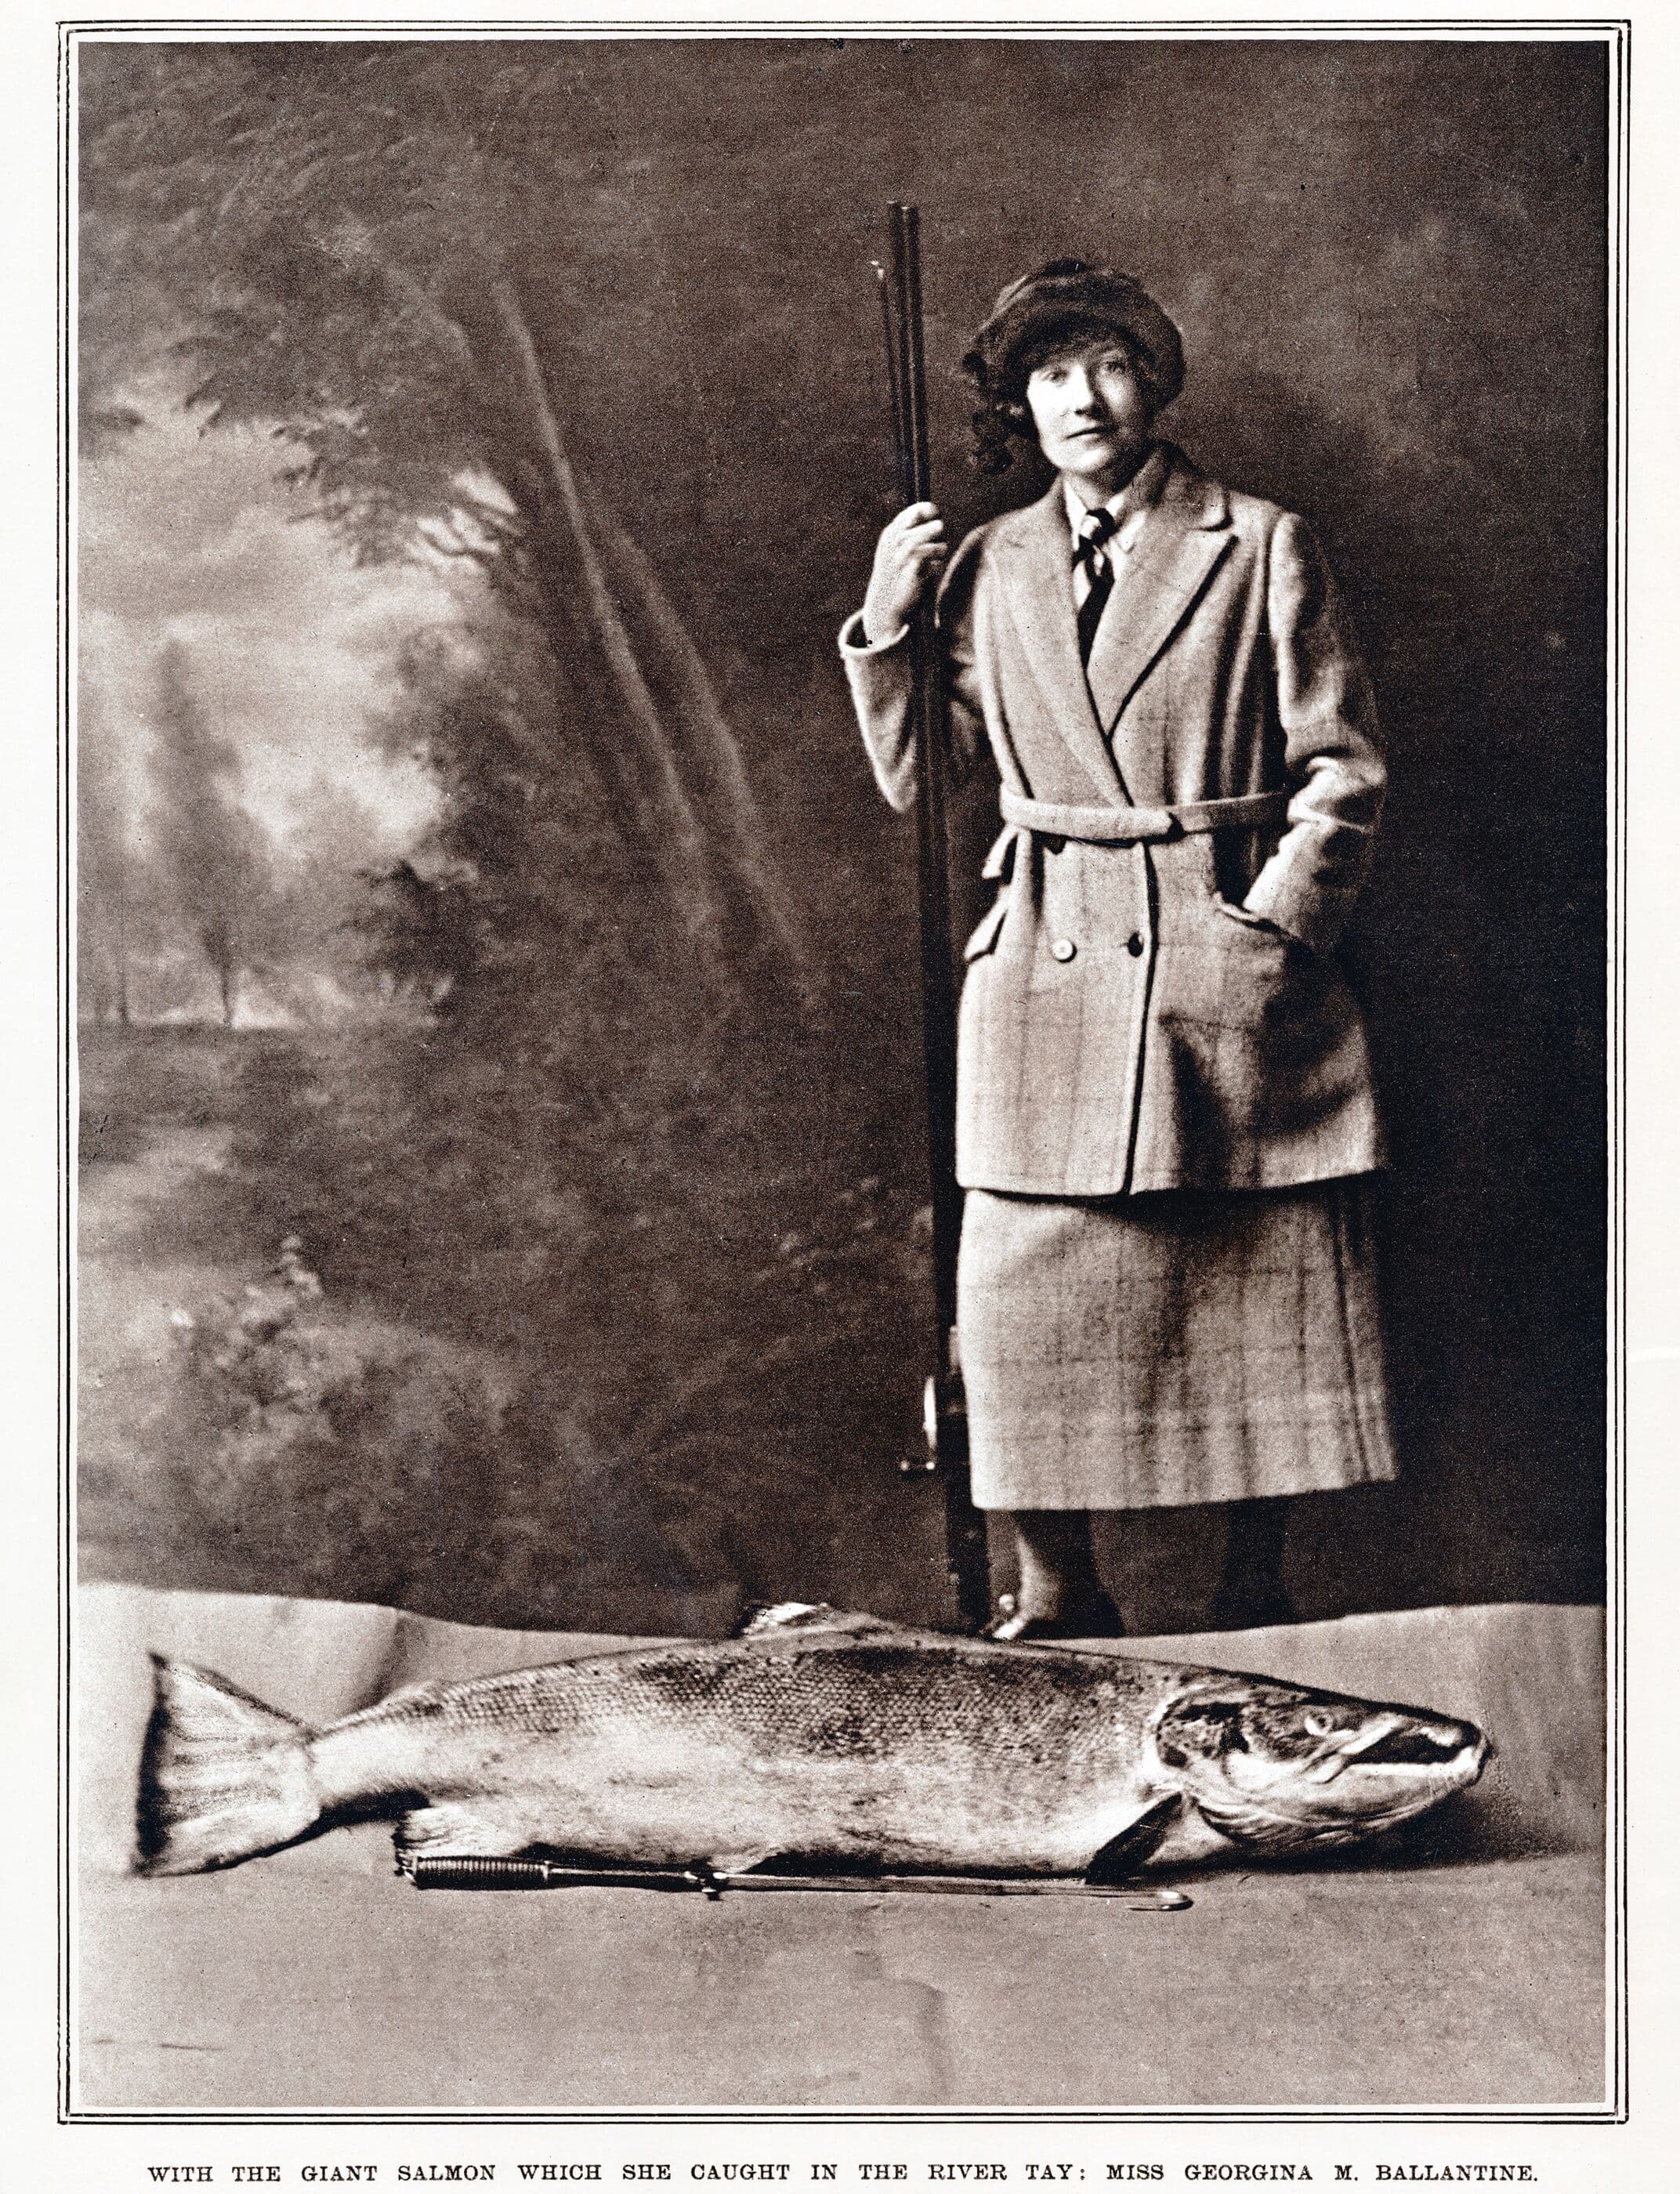 Georgina Ballantine in 1922 with her sixty-four pound Atlantic salmon caught on the River Tay. It is the largest salmon ever caught on a rod in the British Isles. (Lordprice Collection/Alamy Stock Photo)